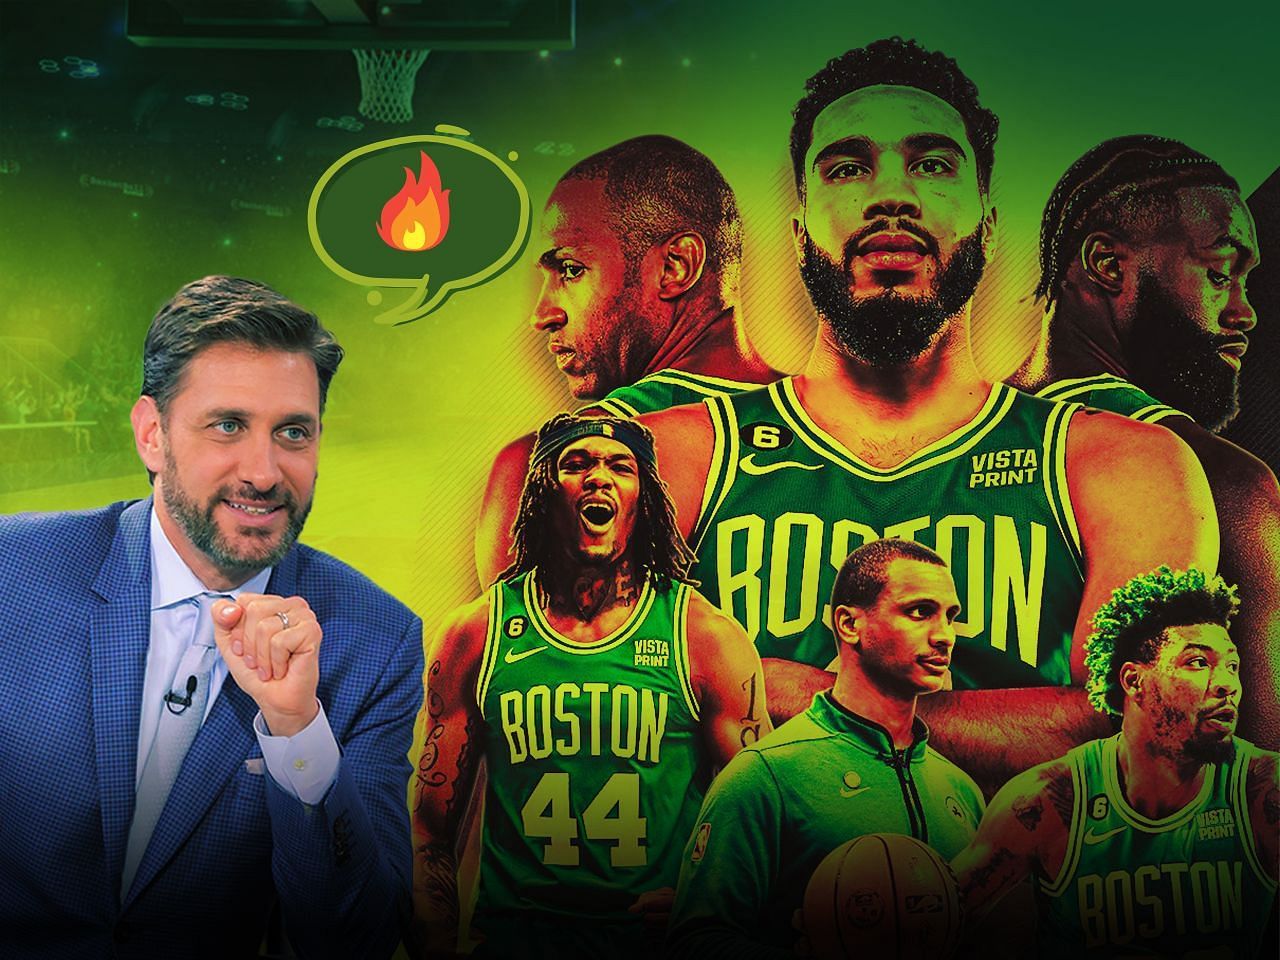 Mike Greenberg believes the Celtics will still win the Eastern Conference finals after being 3-0 down.